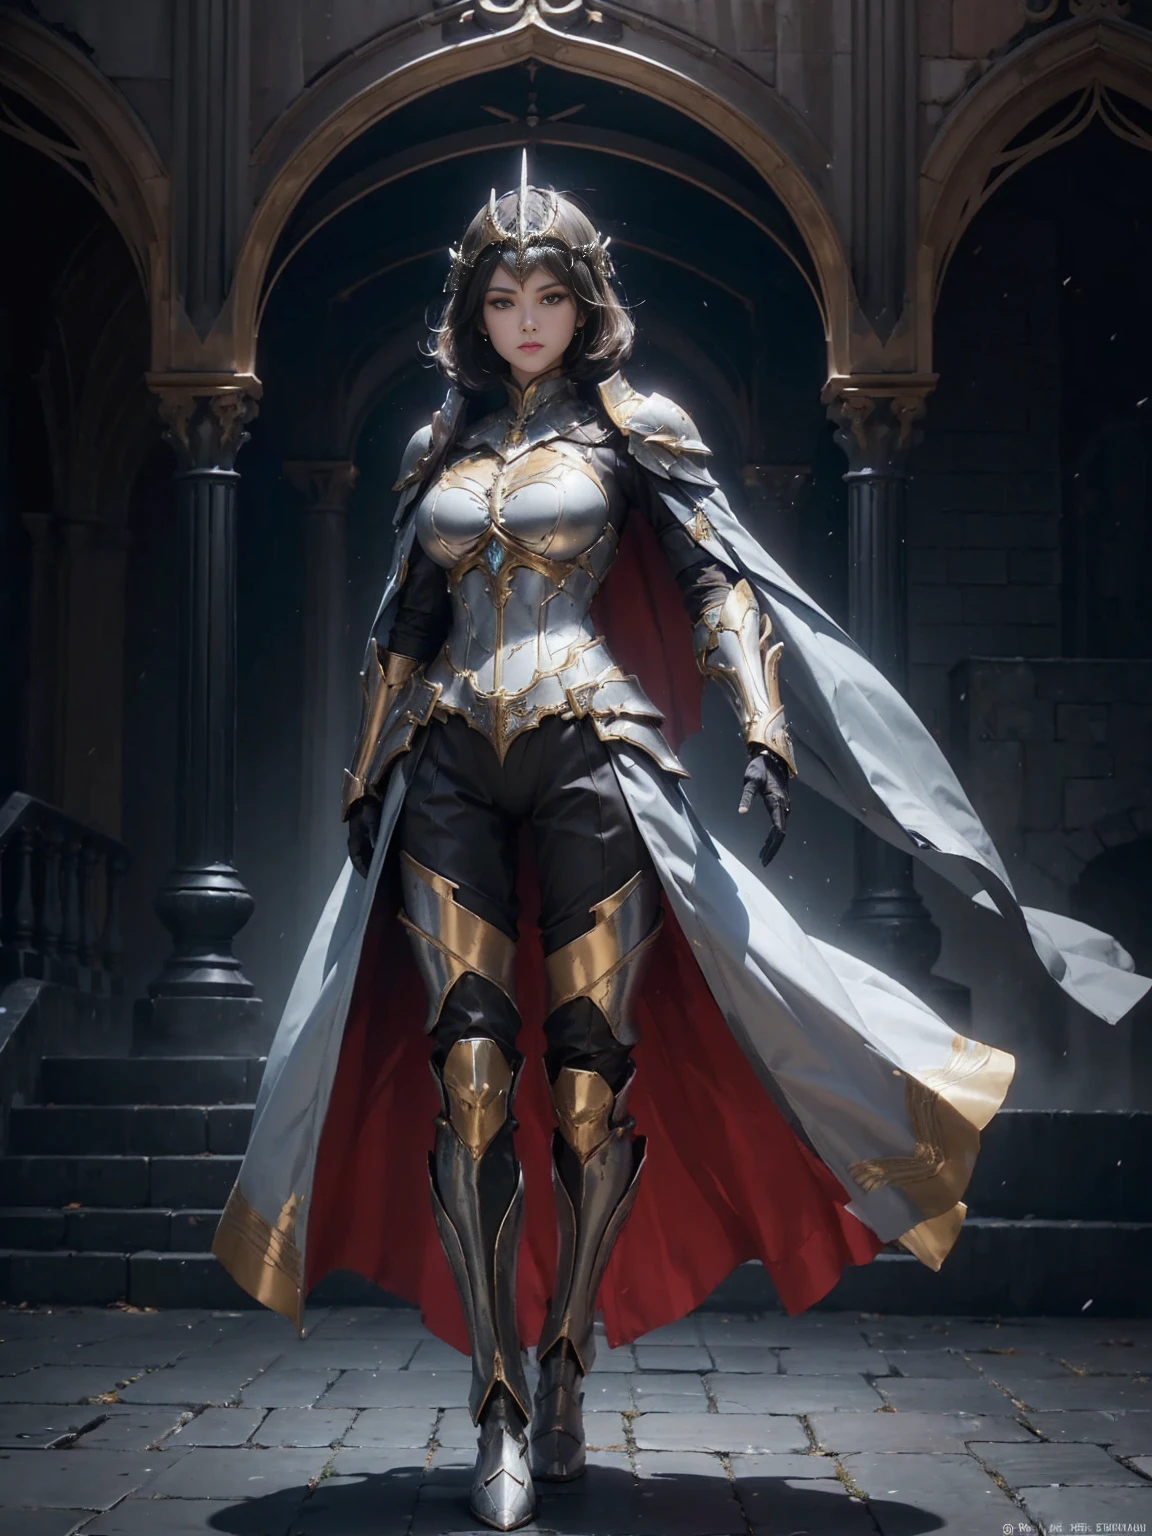 ((1 Full body single woman)) ,(Shooting from front and midle), looking at the camera, centered image, tmasterpiece，A high resolution,Absolutely beautiful, facing camera, Tall and tall，(big breast : 1.3), white short hair with updo, (full coverage black armor, Ornately decorated armor, Exquisite details of the armor and pants, warrior, gloves, helm, show armor iron boots, pauldrons with capes,  allure：young adult,（Tall：1.5），Rich scene detail，In the midst of the war，standing.